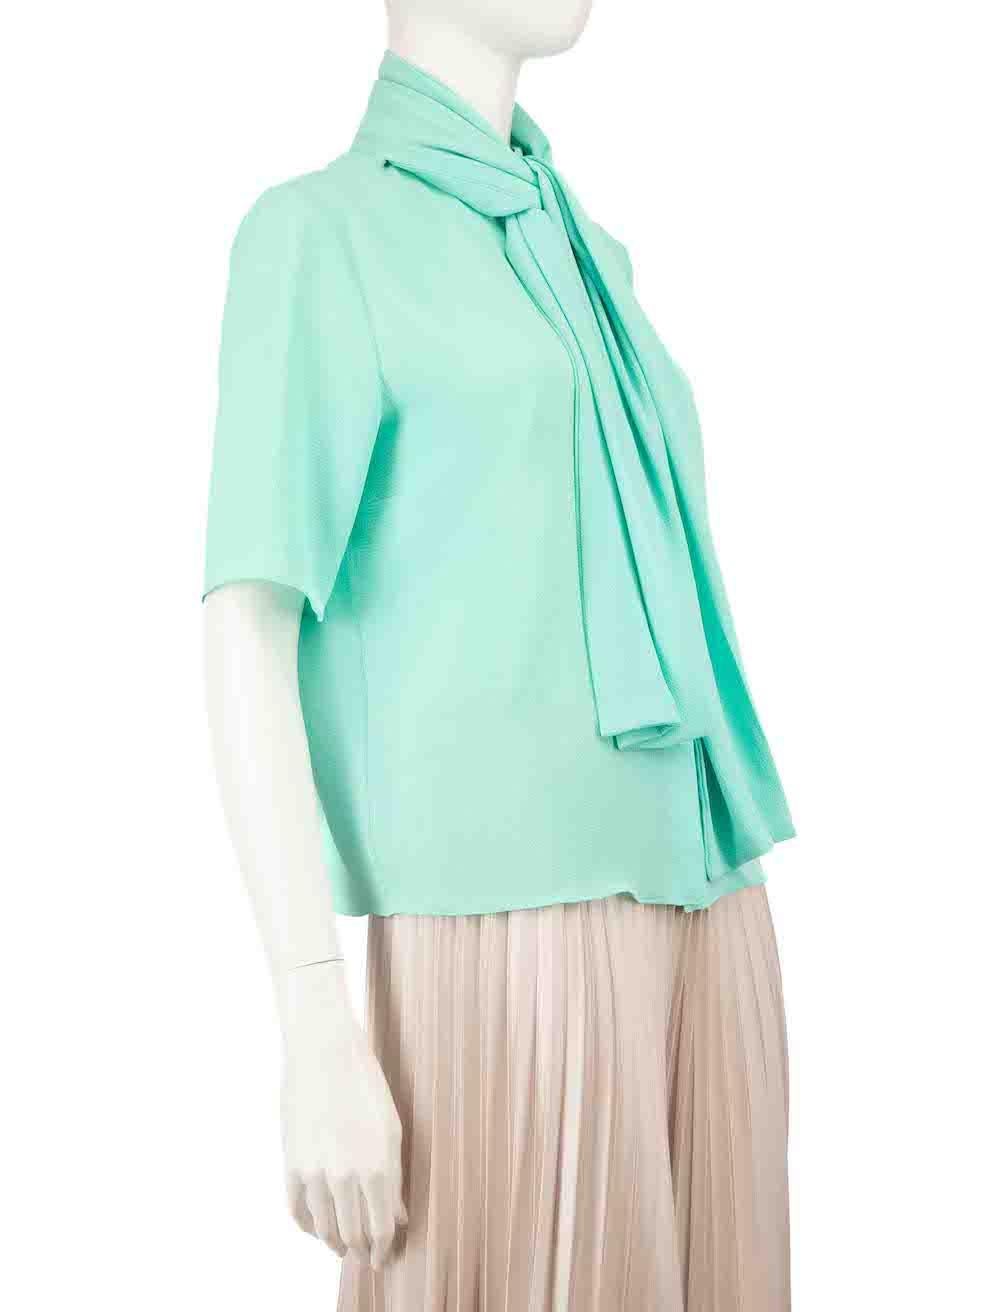 CONDITION is Very good. Minimal wear to blouse is evident where a tiny mark is seen to the left side of scarf on this used Edeline Lee designer resale item.
 
 
 
 Details
 
 
 Turquoise
 
 Polyester
 
 Blouse
 
 Short sleeves
 
 Front button up